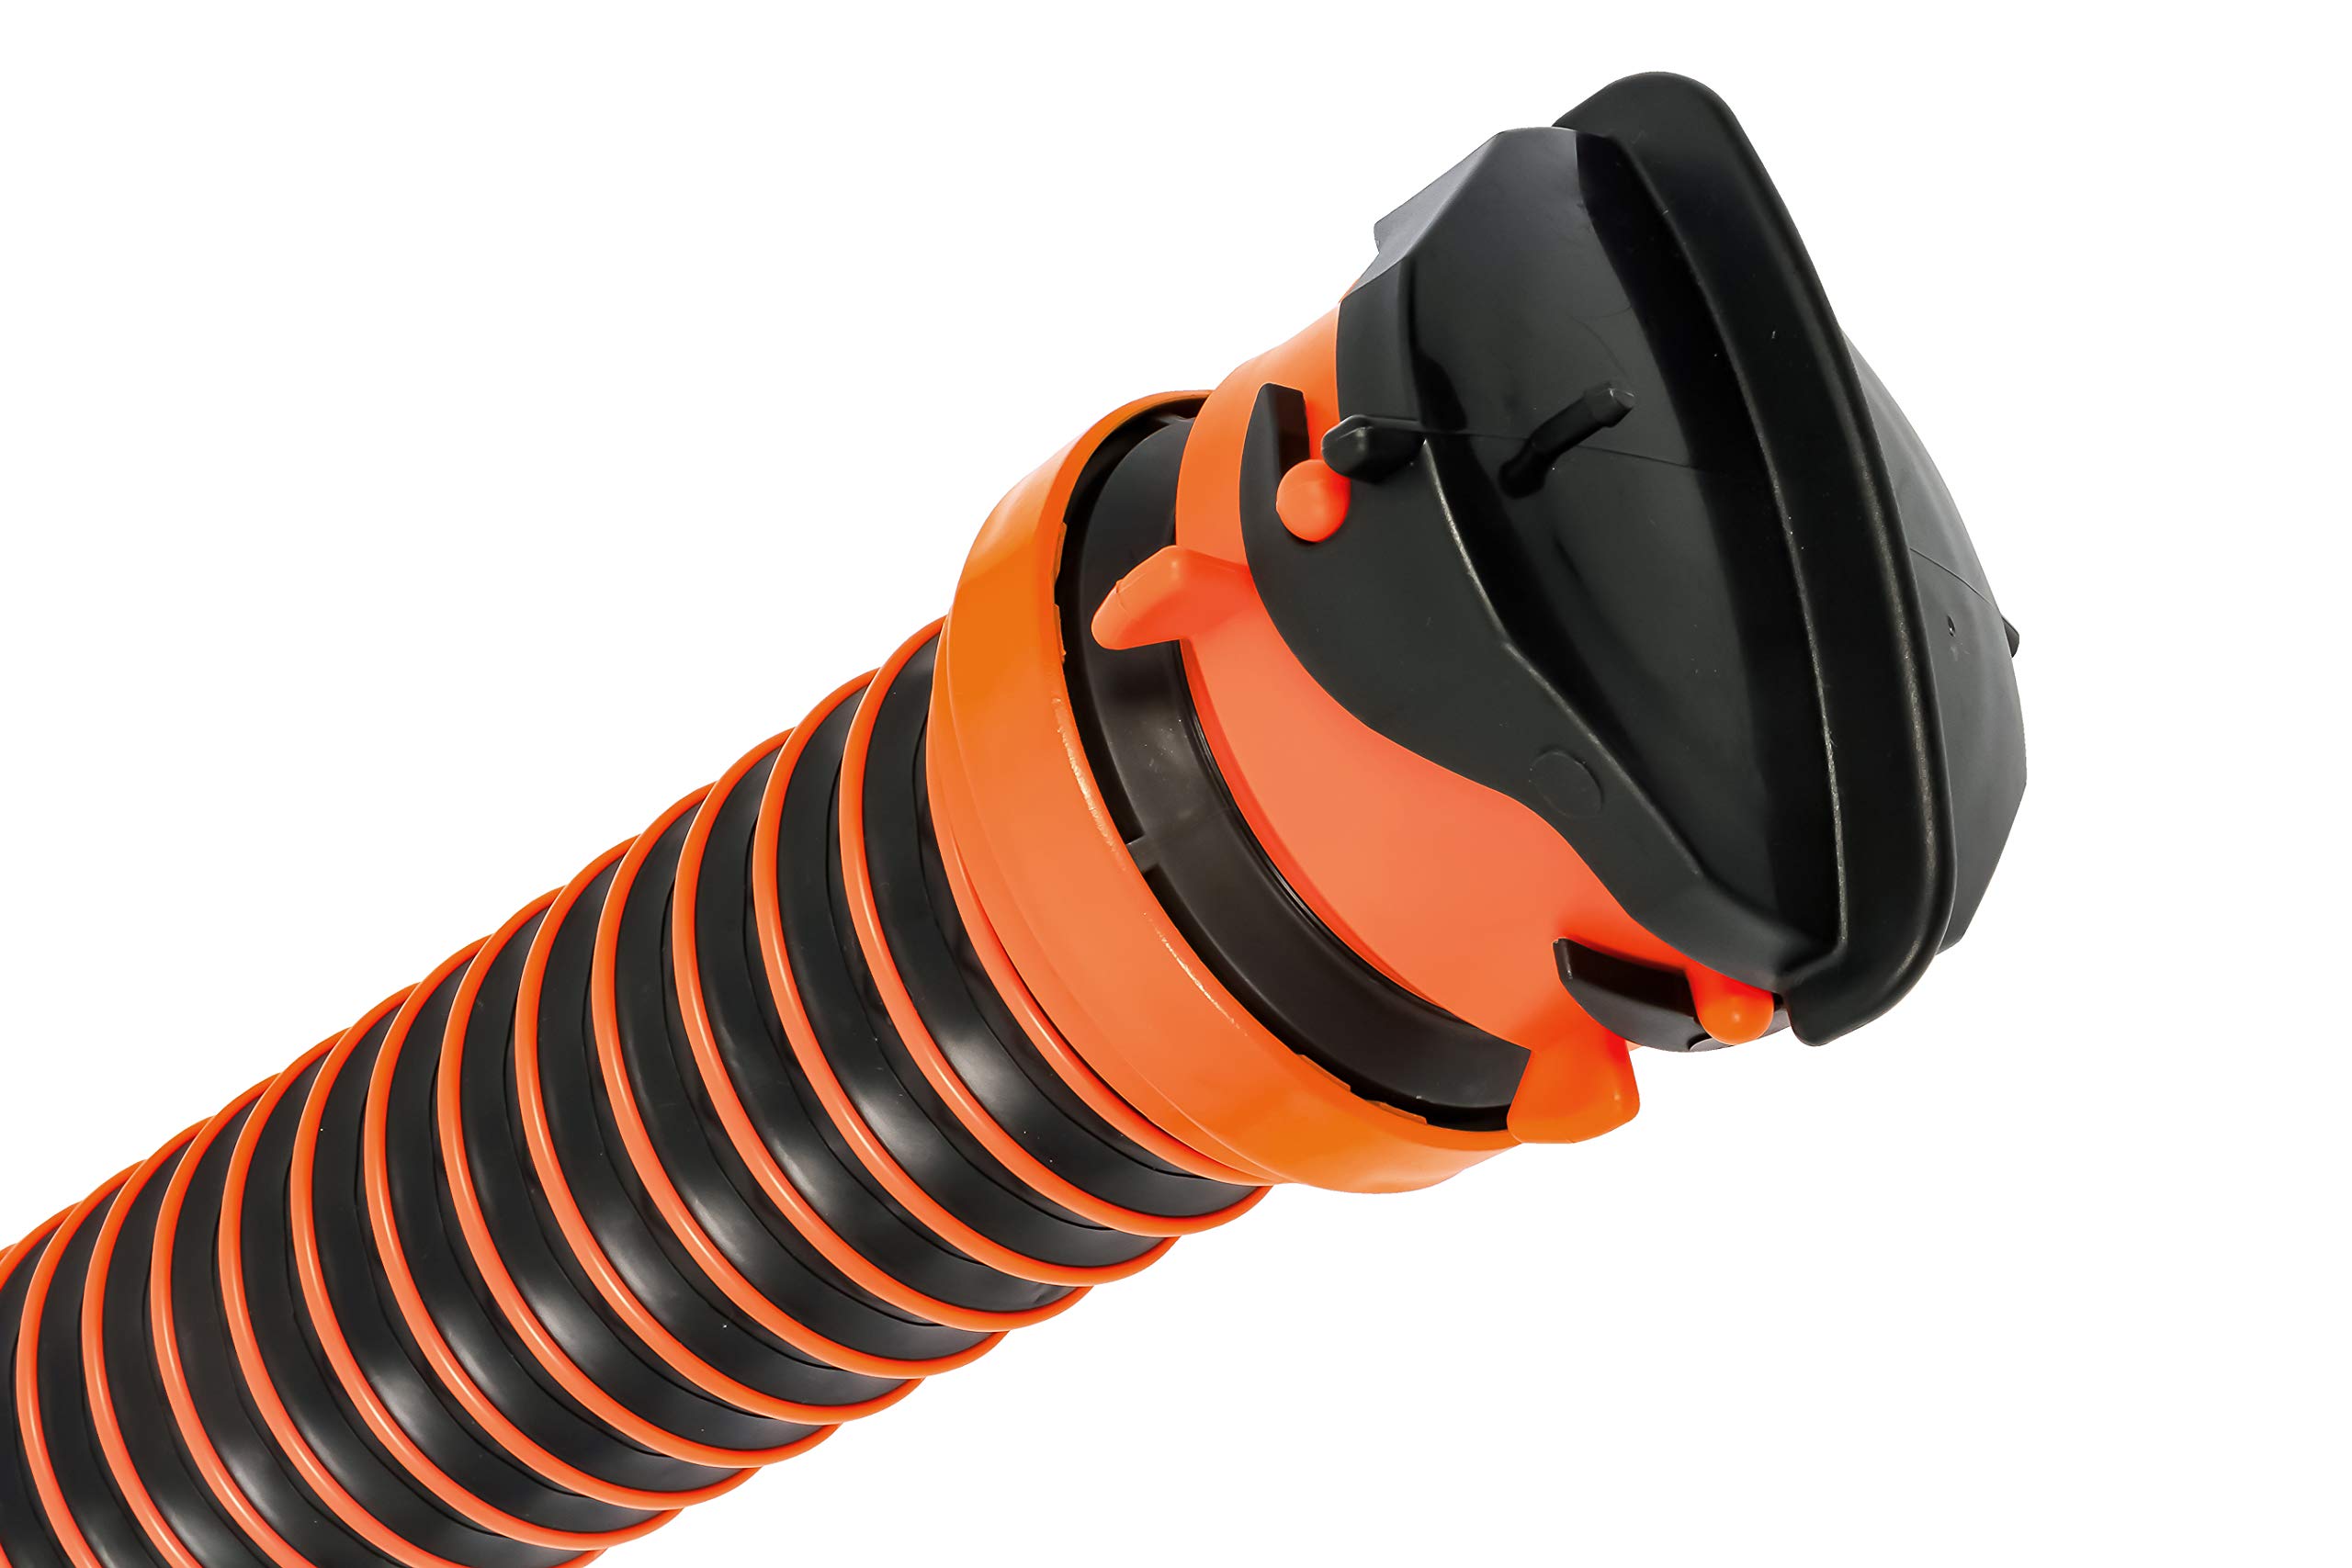 Camco RhinoEXTREME 20-Ft Camper/RV Sewer Hose Kit | Features TPE Tech for Crush and Abrasion Resistance, a 360-Degree Clear Swivel Wye Fitting, and a Removable 4-in-1 Adapter for Easy Storage (21056)